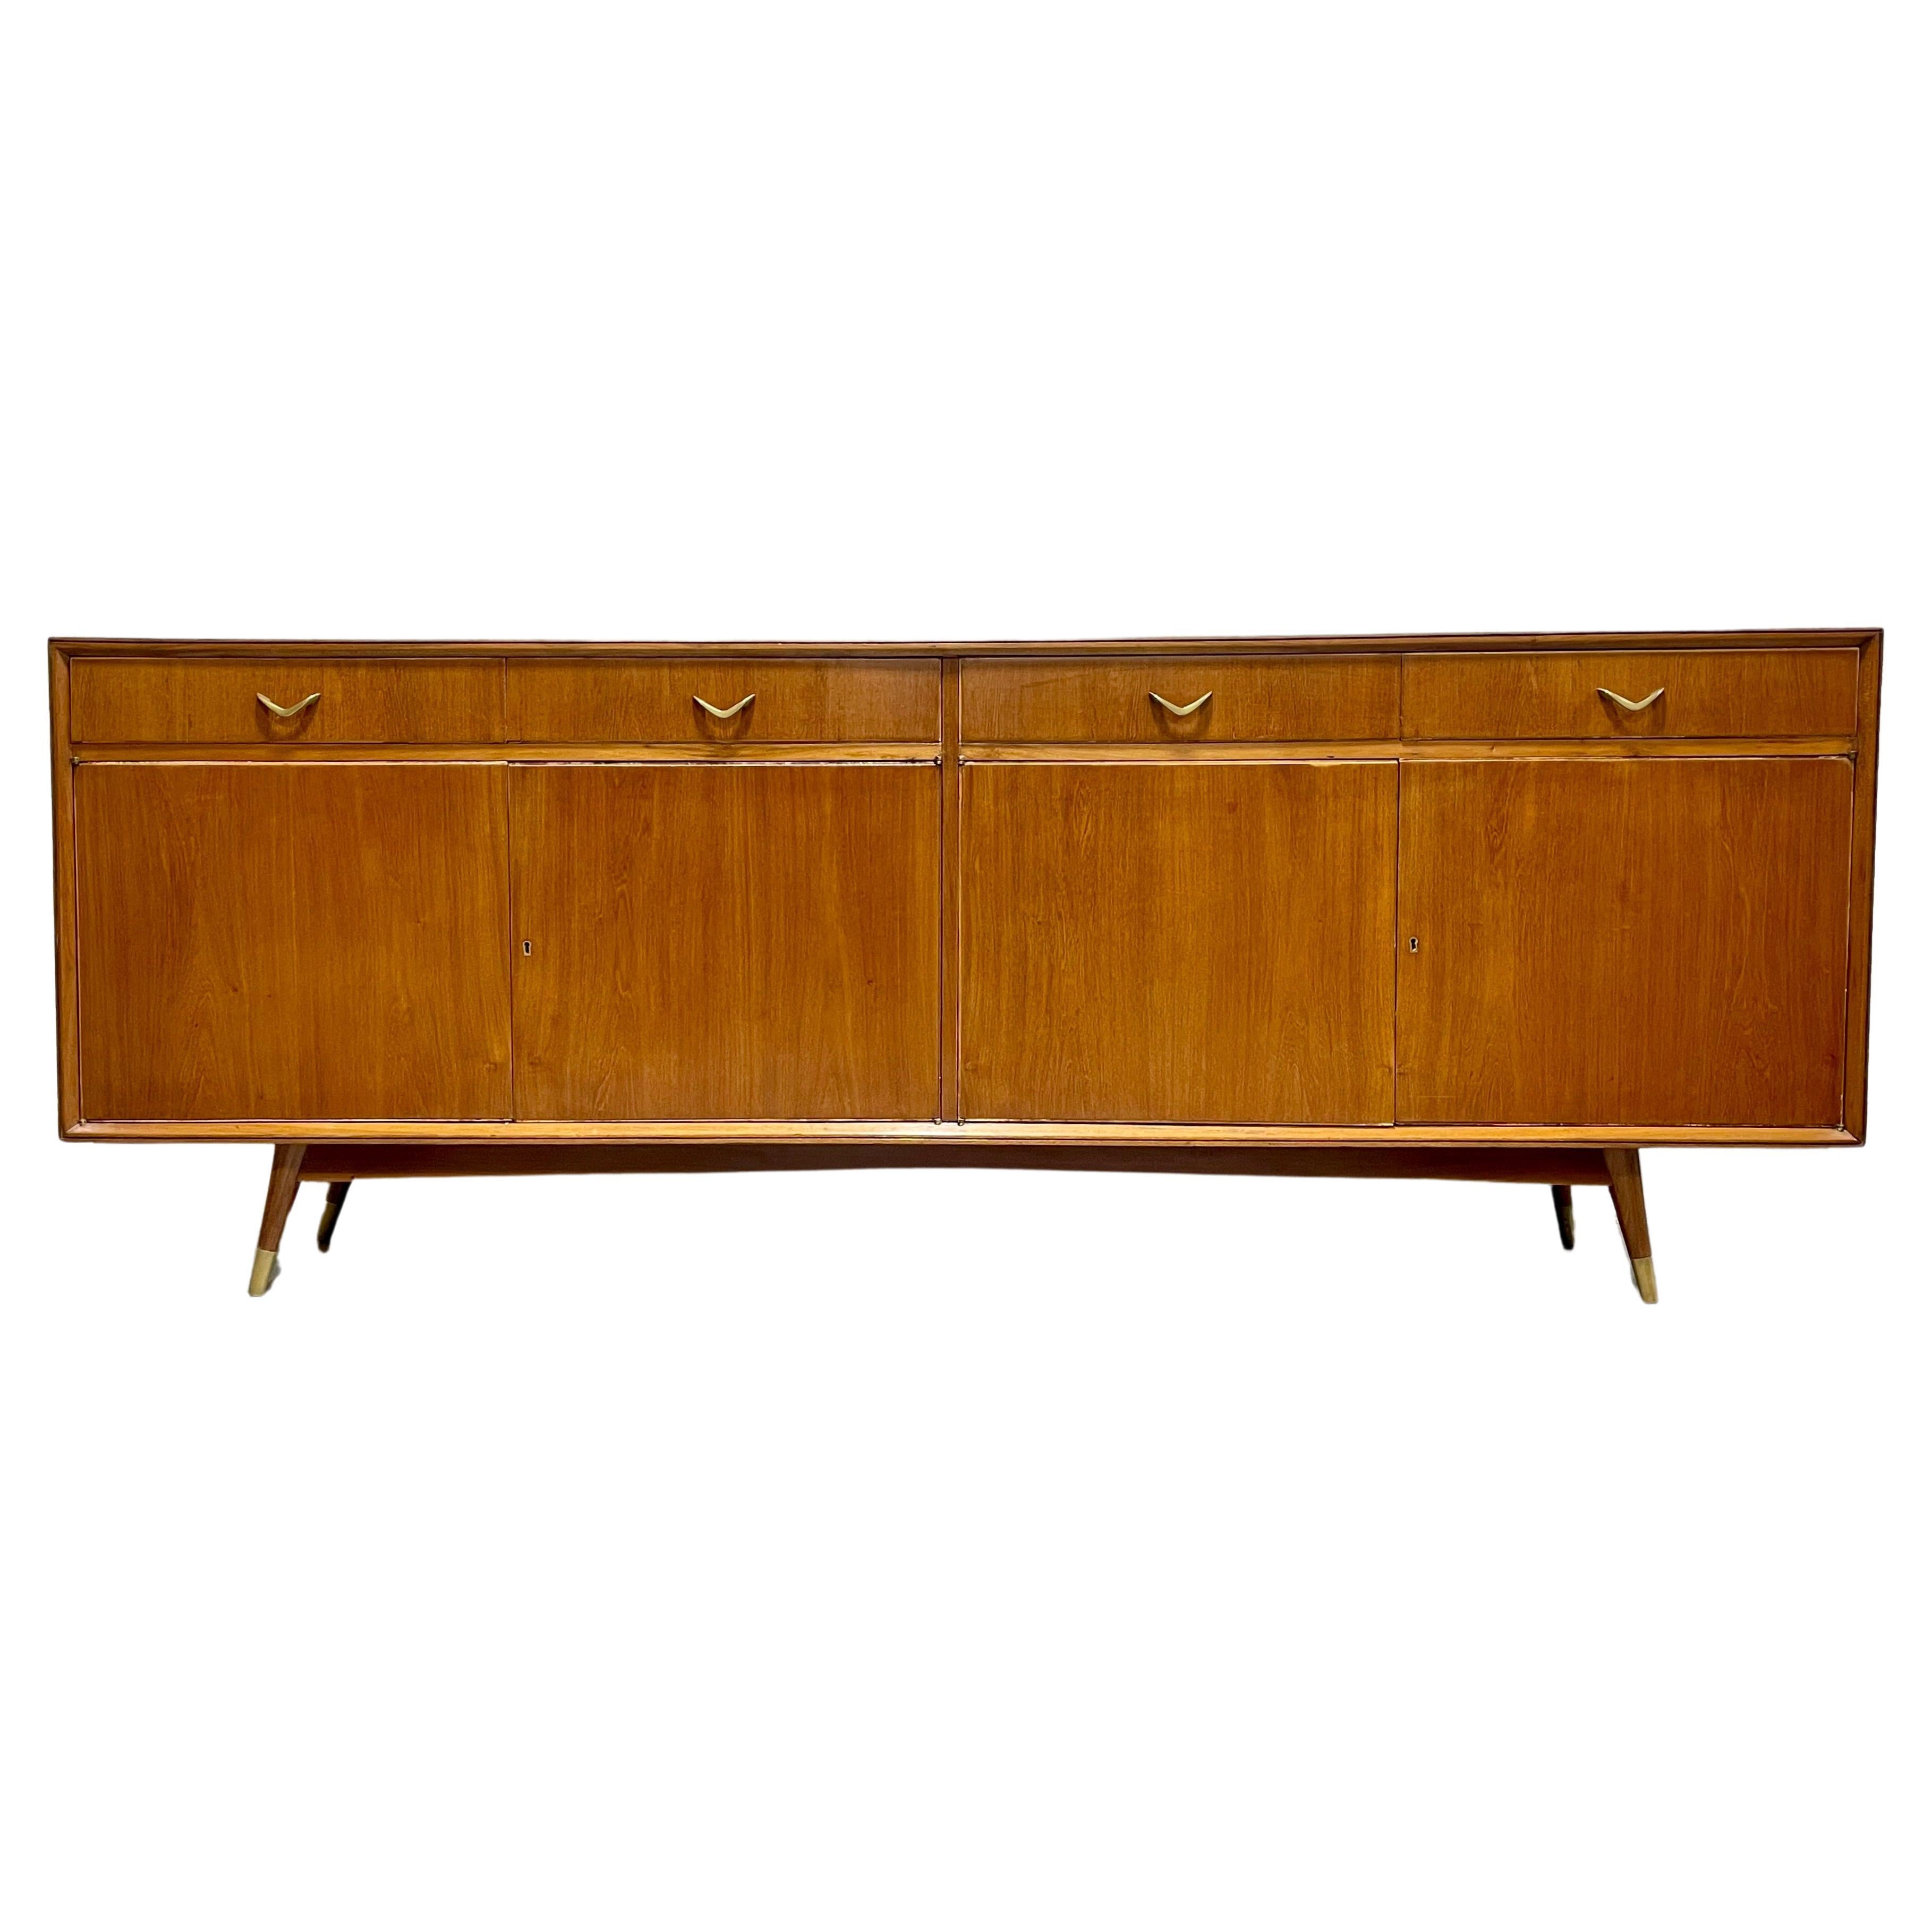 Extra langer CLASSIC Mid Century MODERN French CREDENZA / Media Stand, ca. 1960er Jahre